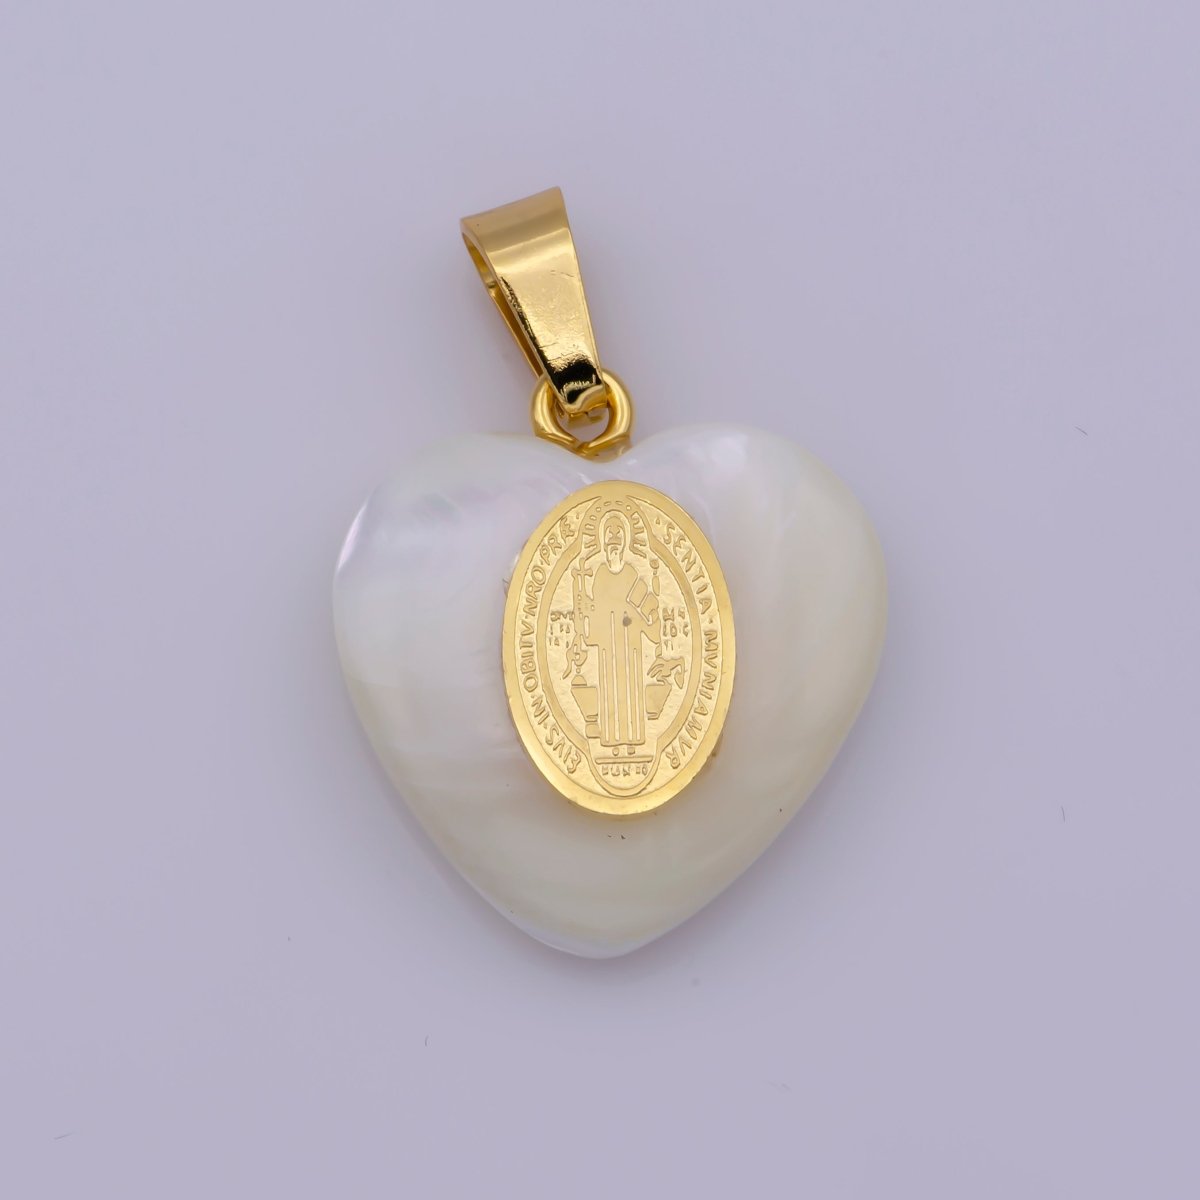 Shell Pearl Our Lady of Guadalupe, Virgin Mary Pendant, Saint Benedict Charm in Heart Pearl Charm for Necklace Making J-522 J-524 J-525 - DLUXCA